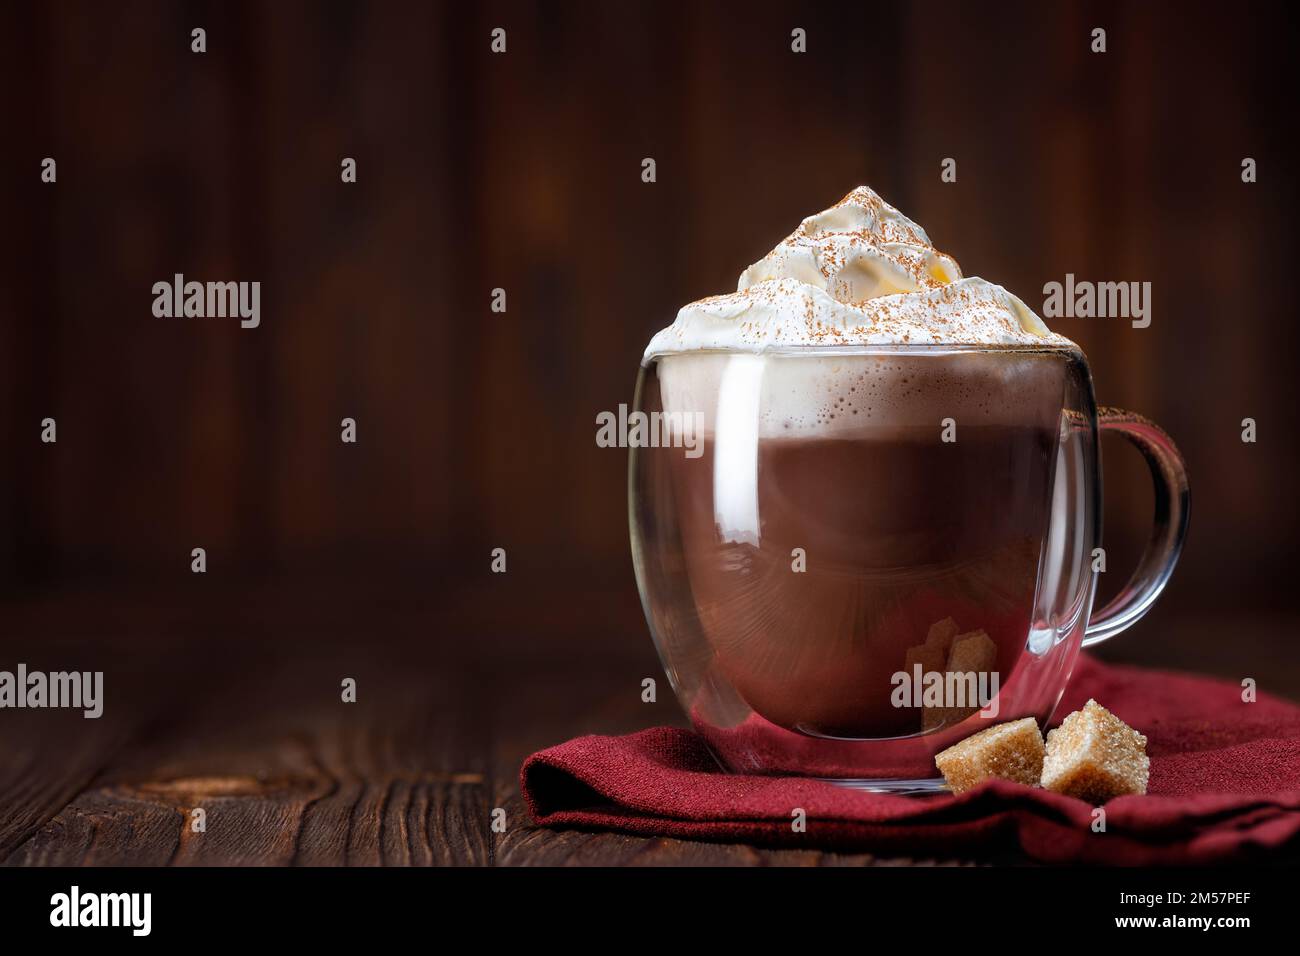 cocoa or hot chocolate with whipped cream in glass cup on table Stock Photo